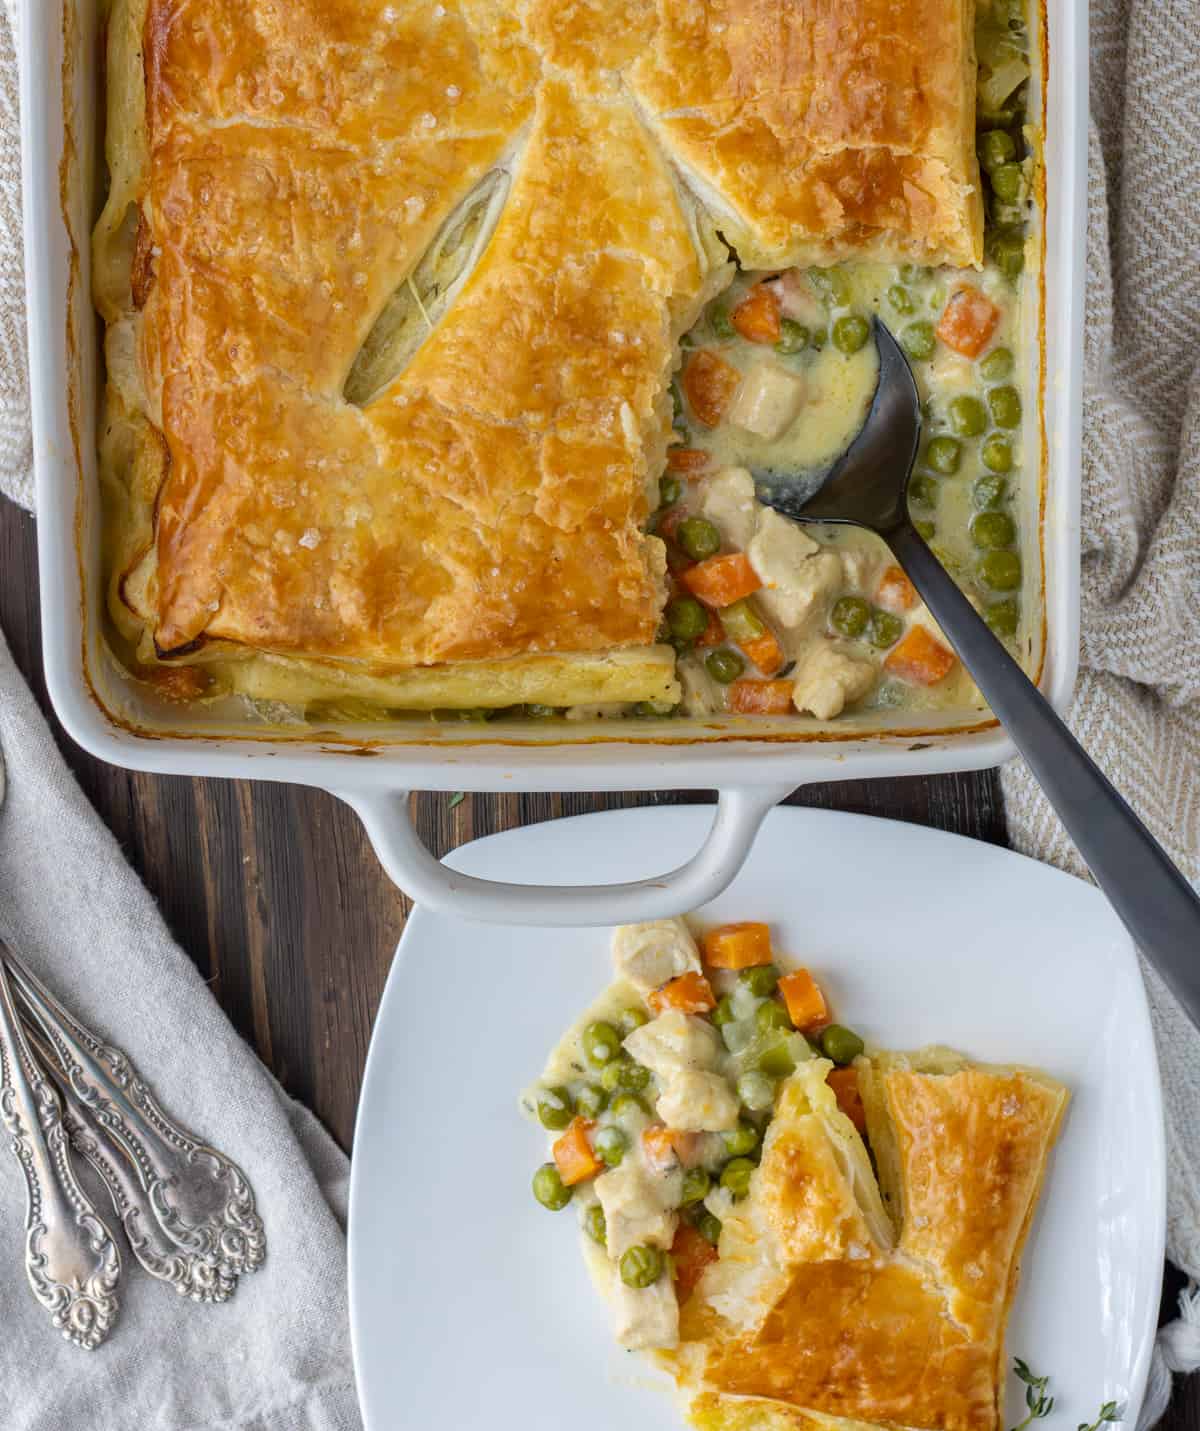 Chicken pot pie in a baking dish with a scoop out on a plate next to it.